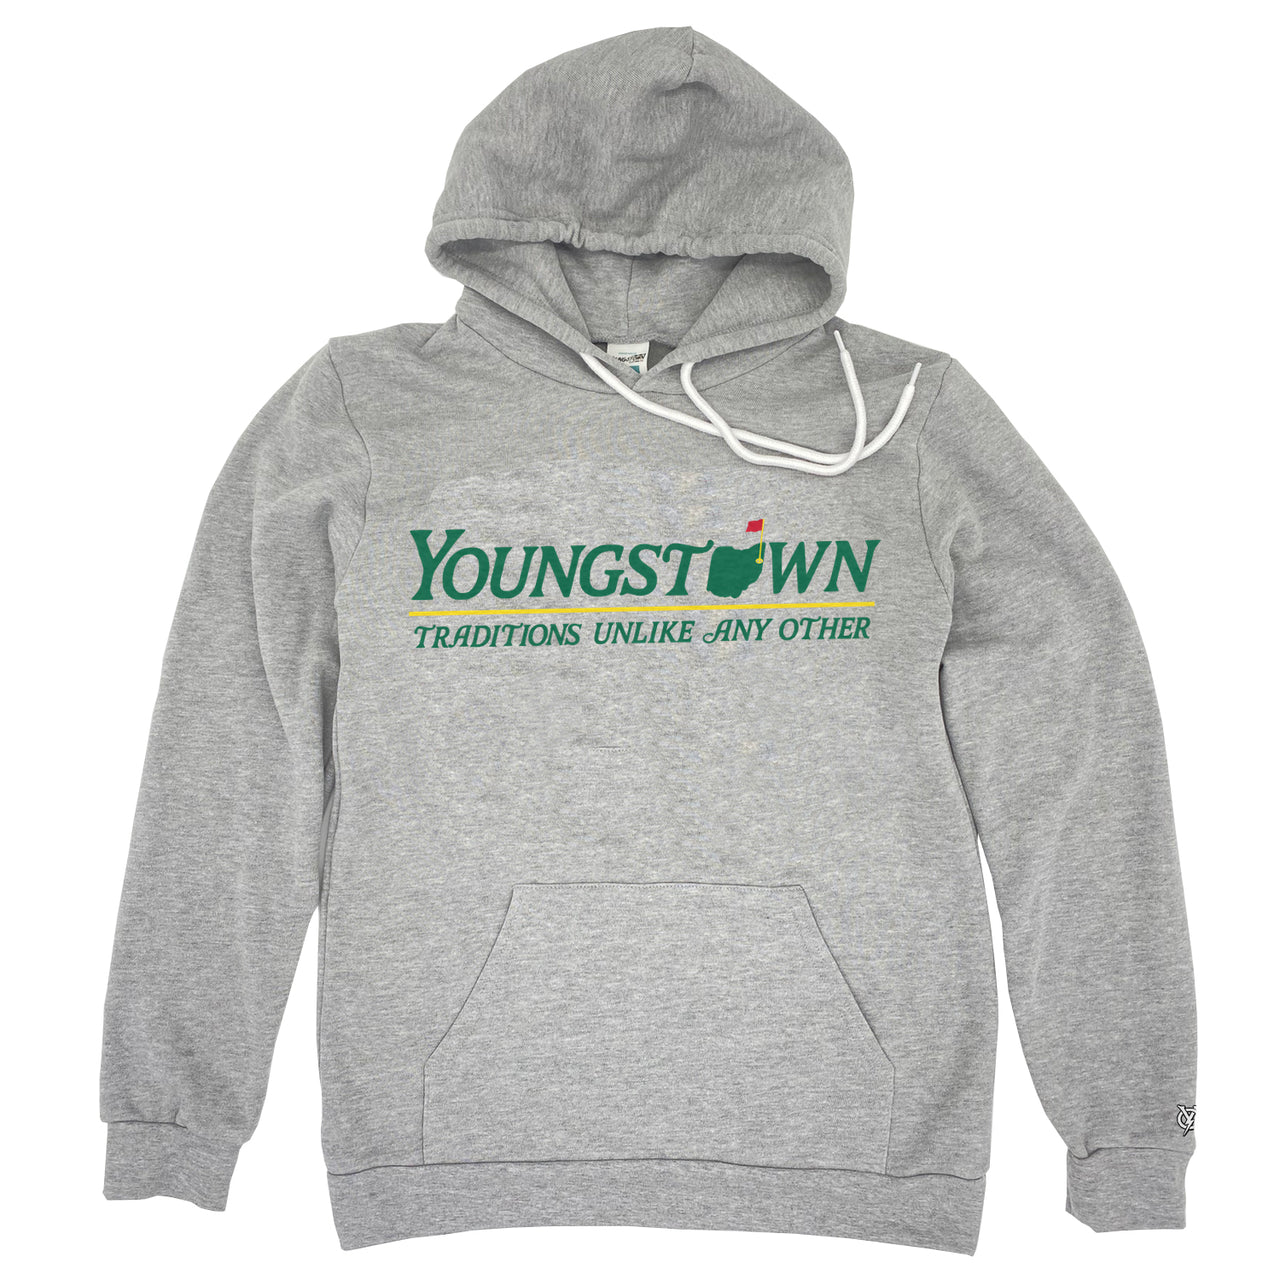 Youngstown | Traditions Unlike Any Other Hoodie